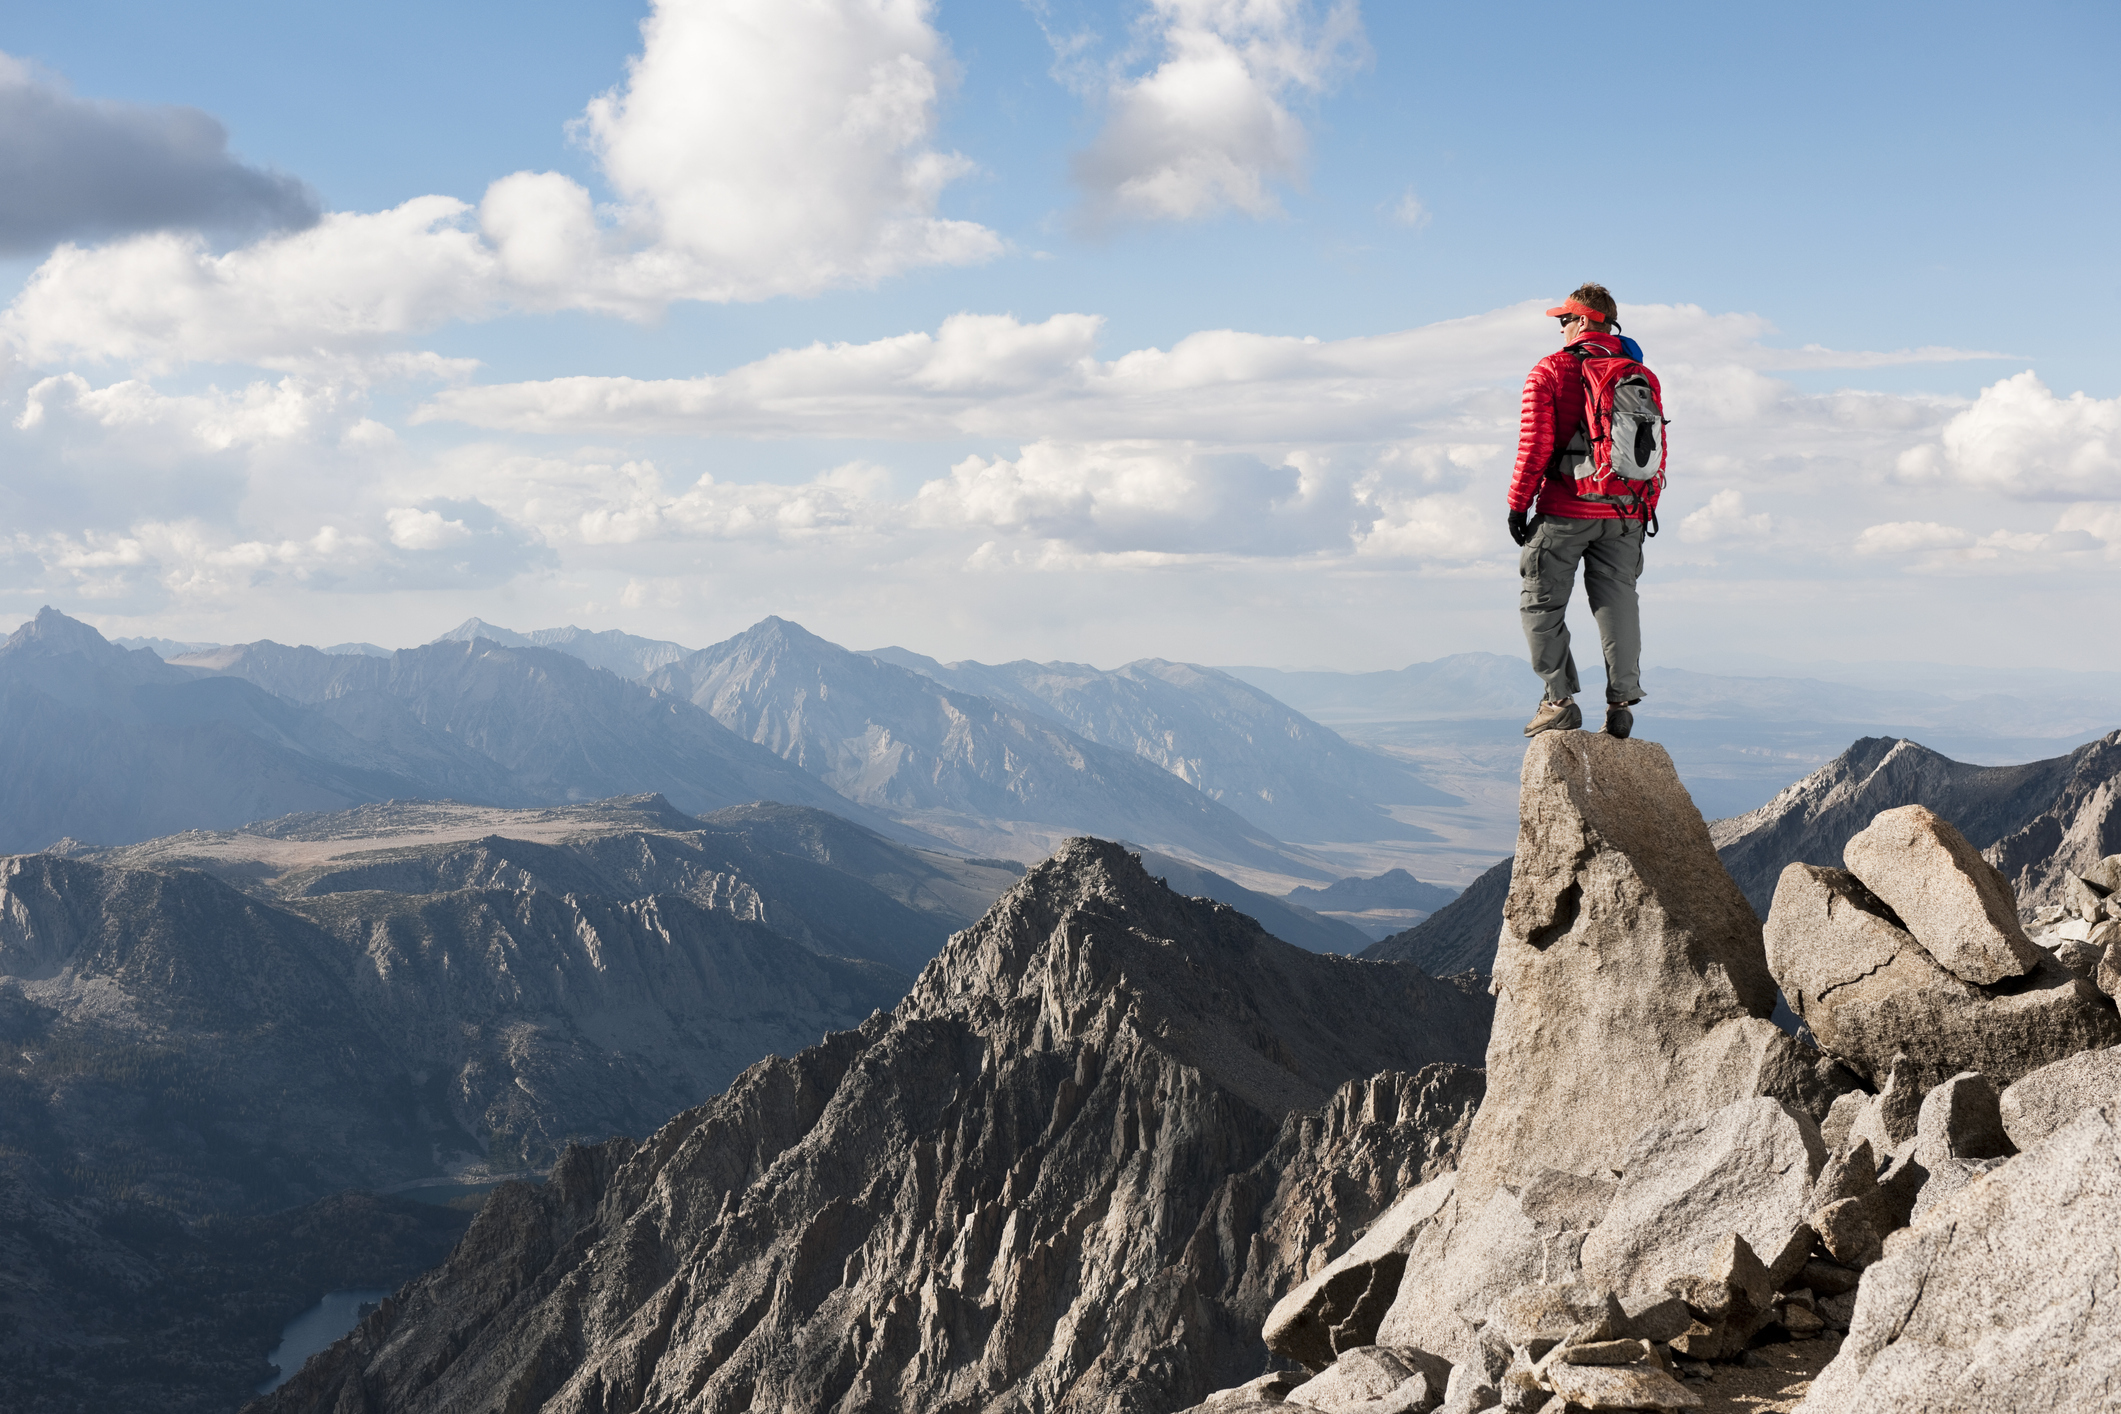 A person in hiking gear stands on top of a mountain and looks out over the summit.